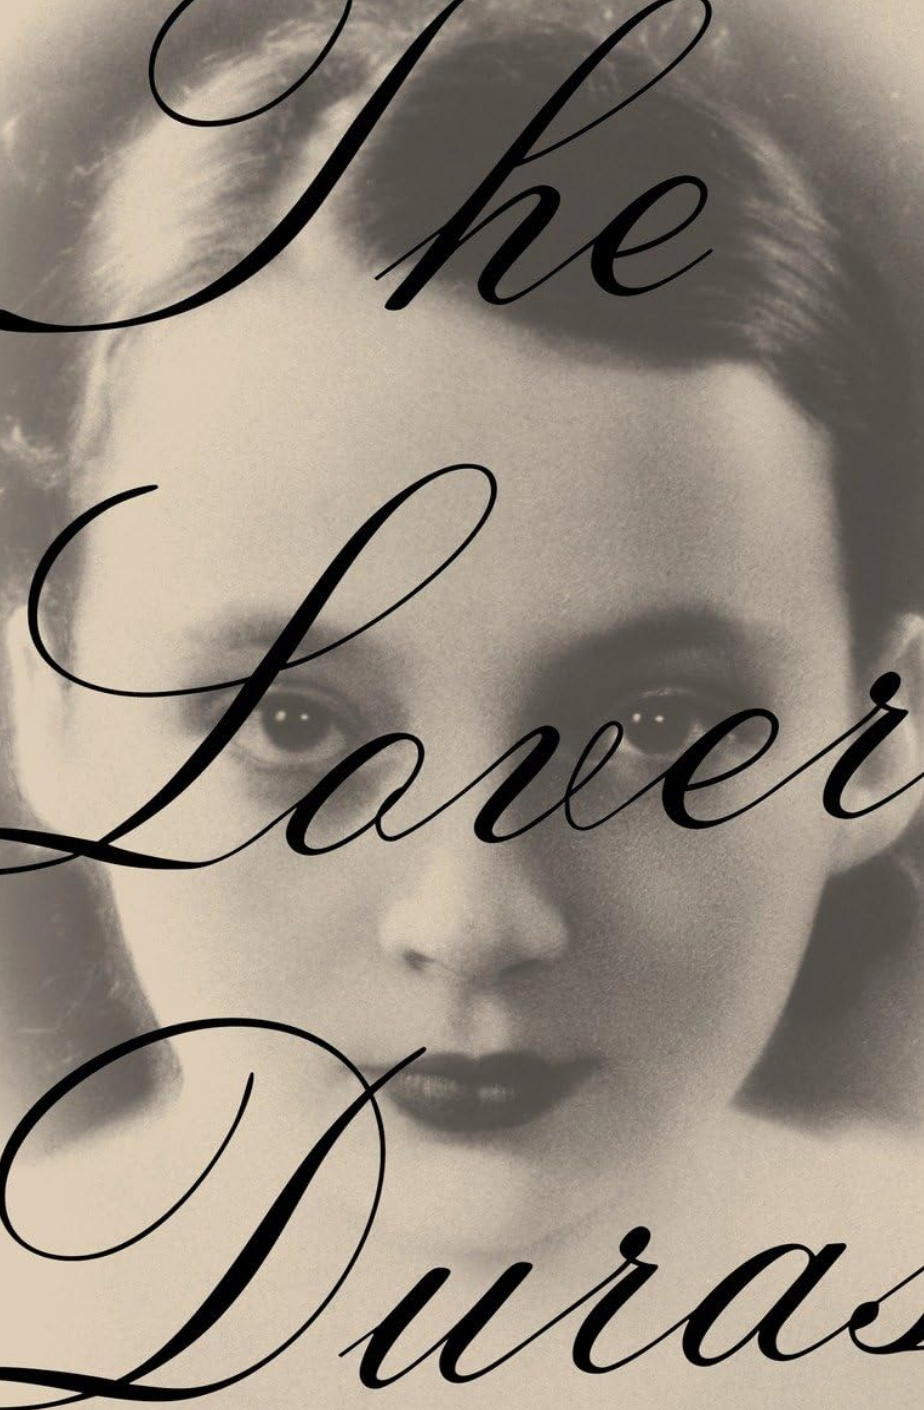 Book cover: "The Lover."